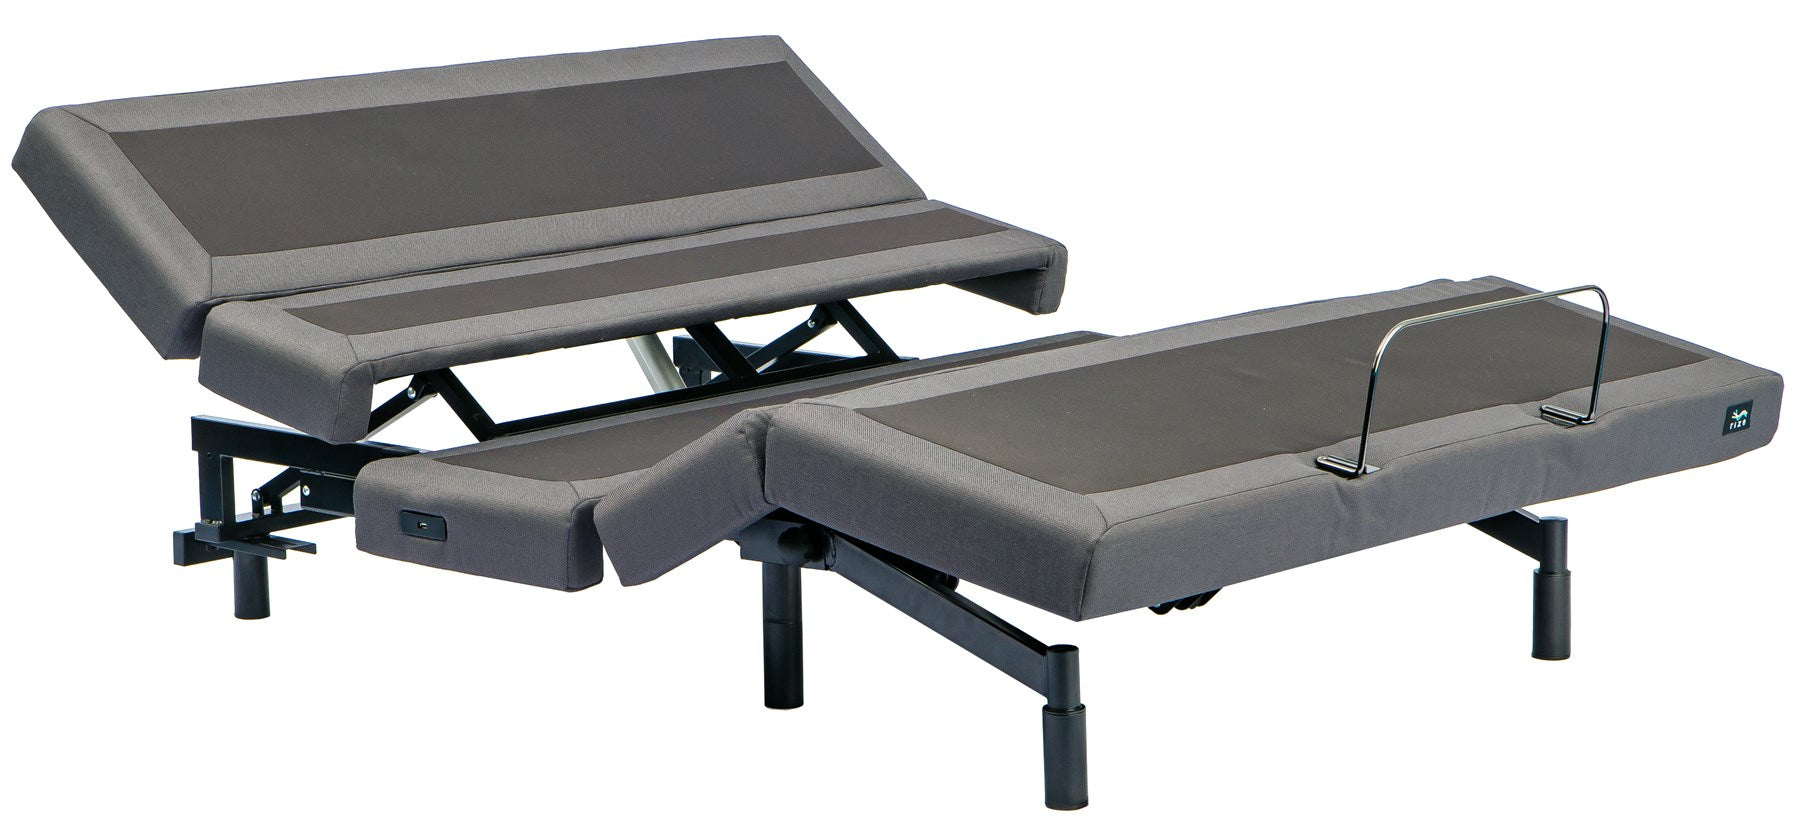 The Rize Contemporary III Adjustable Bed